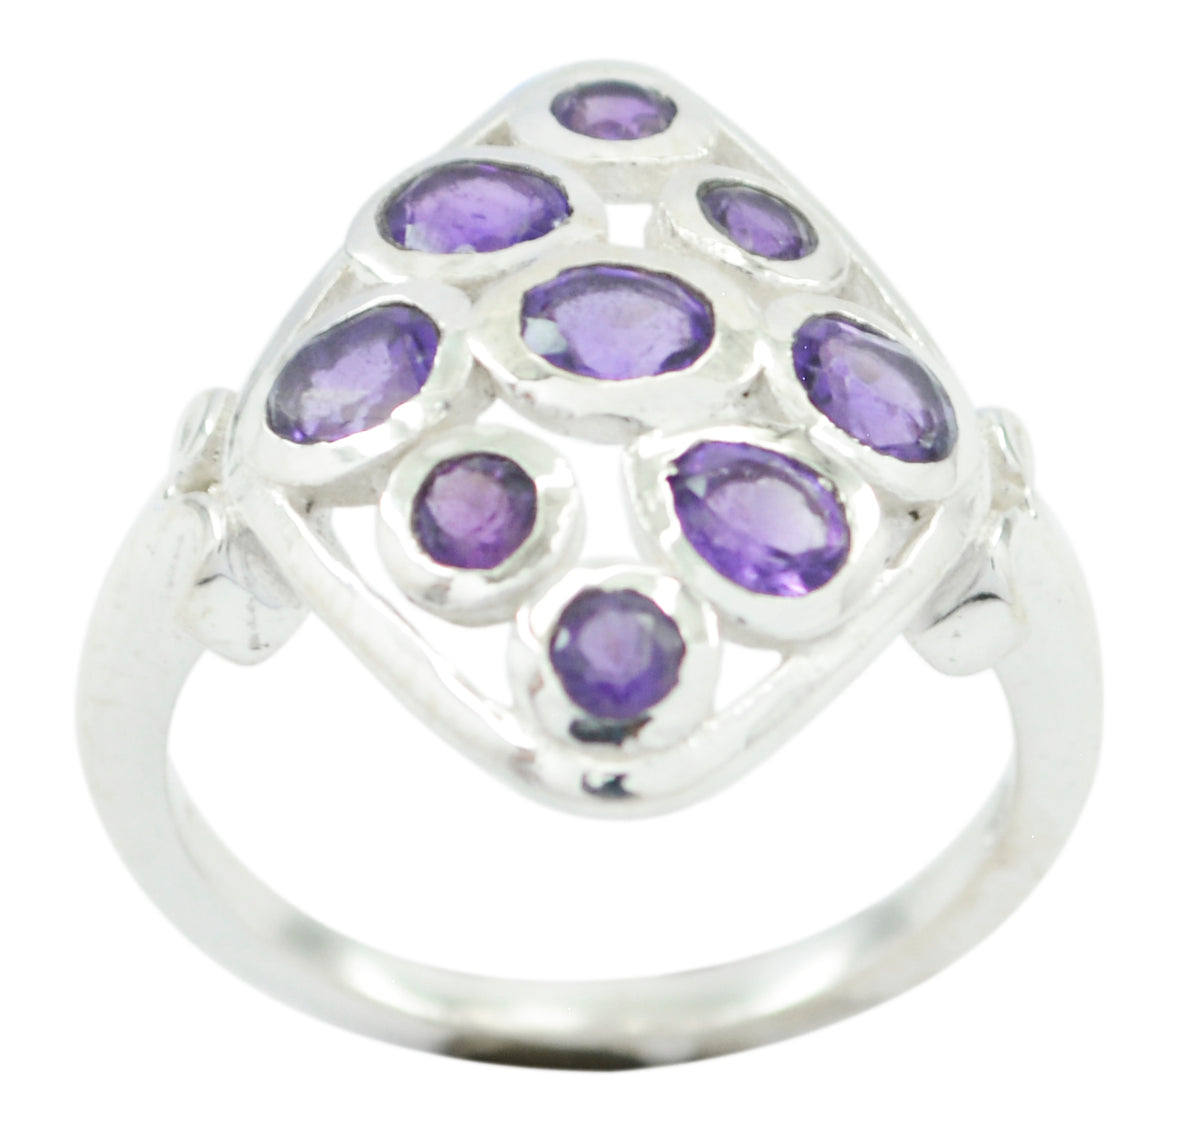 Statuesque Gemstones Amethyst 925 Sterling Silver Rings Crown Jewelry